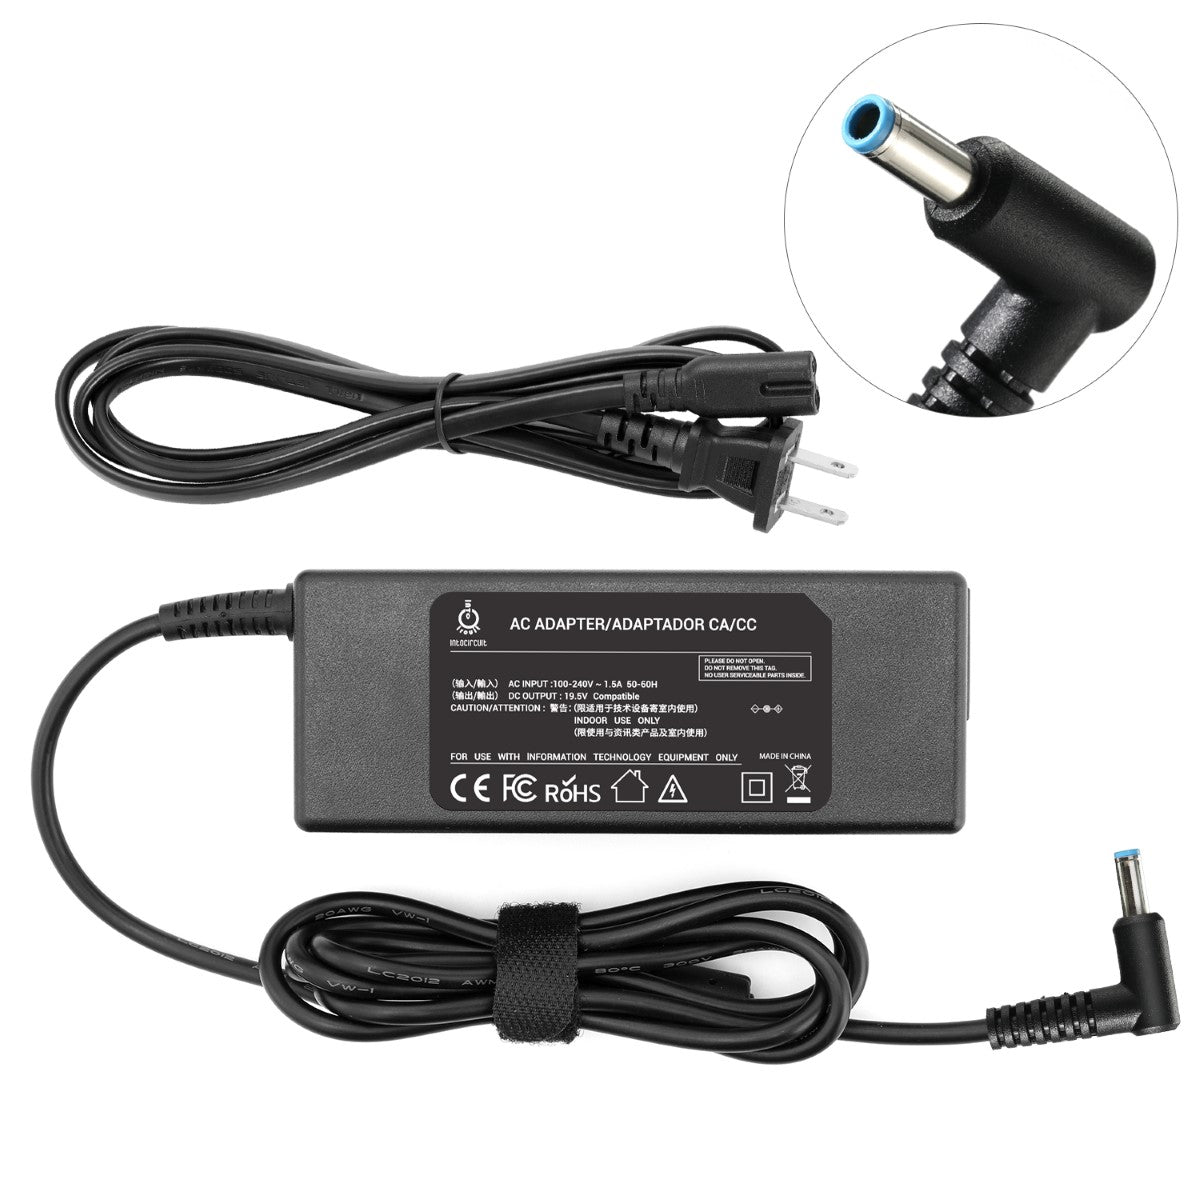 Charger for HP 15-df0068nr Spectre x360 Laptop